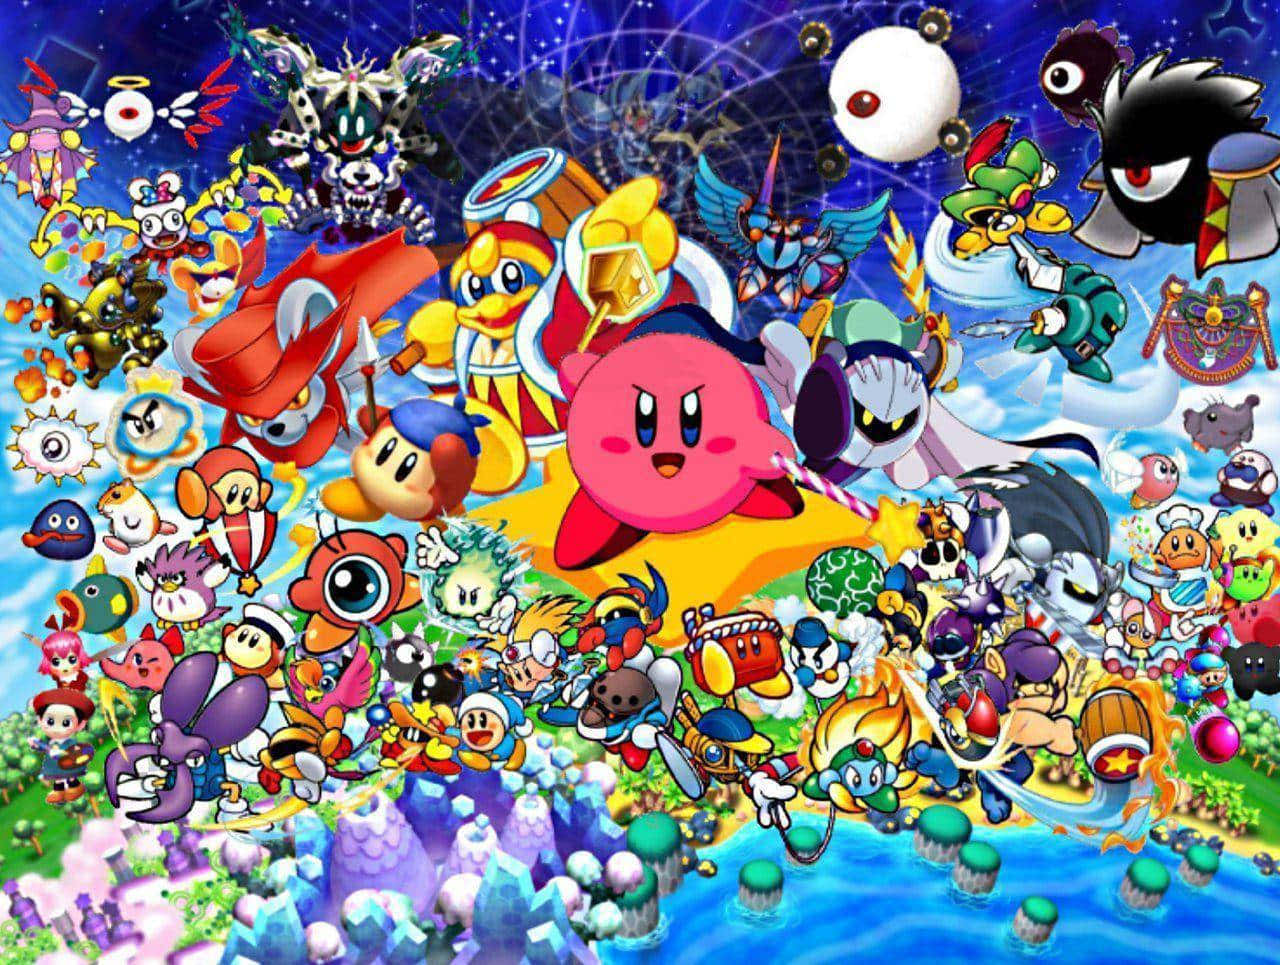 Colorful Kirbyand Friends Collage Wallpaper